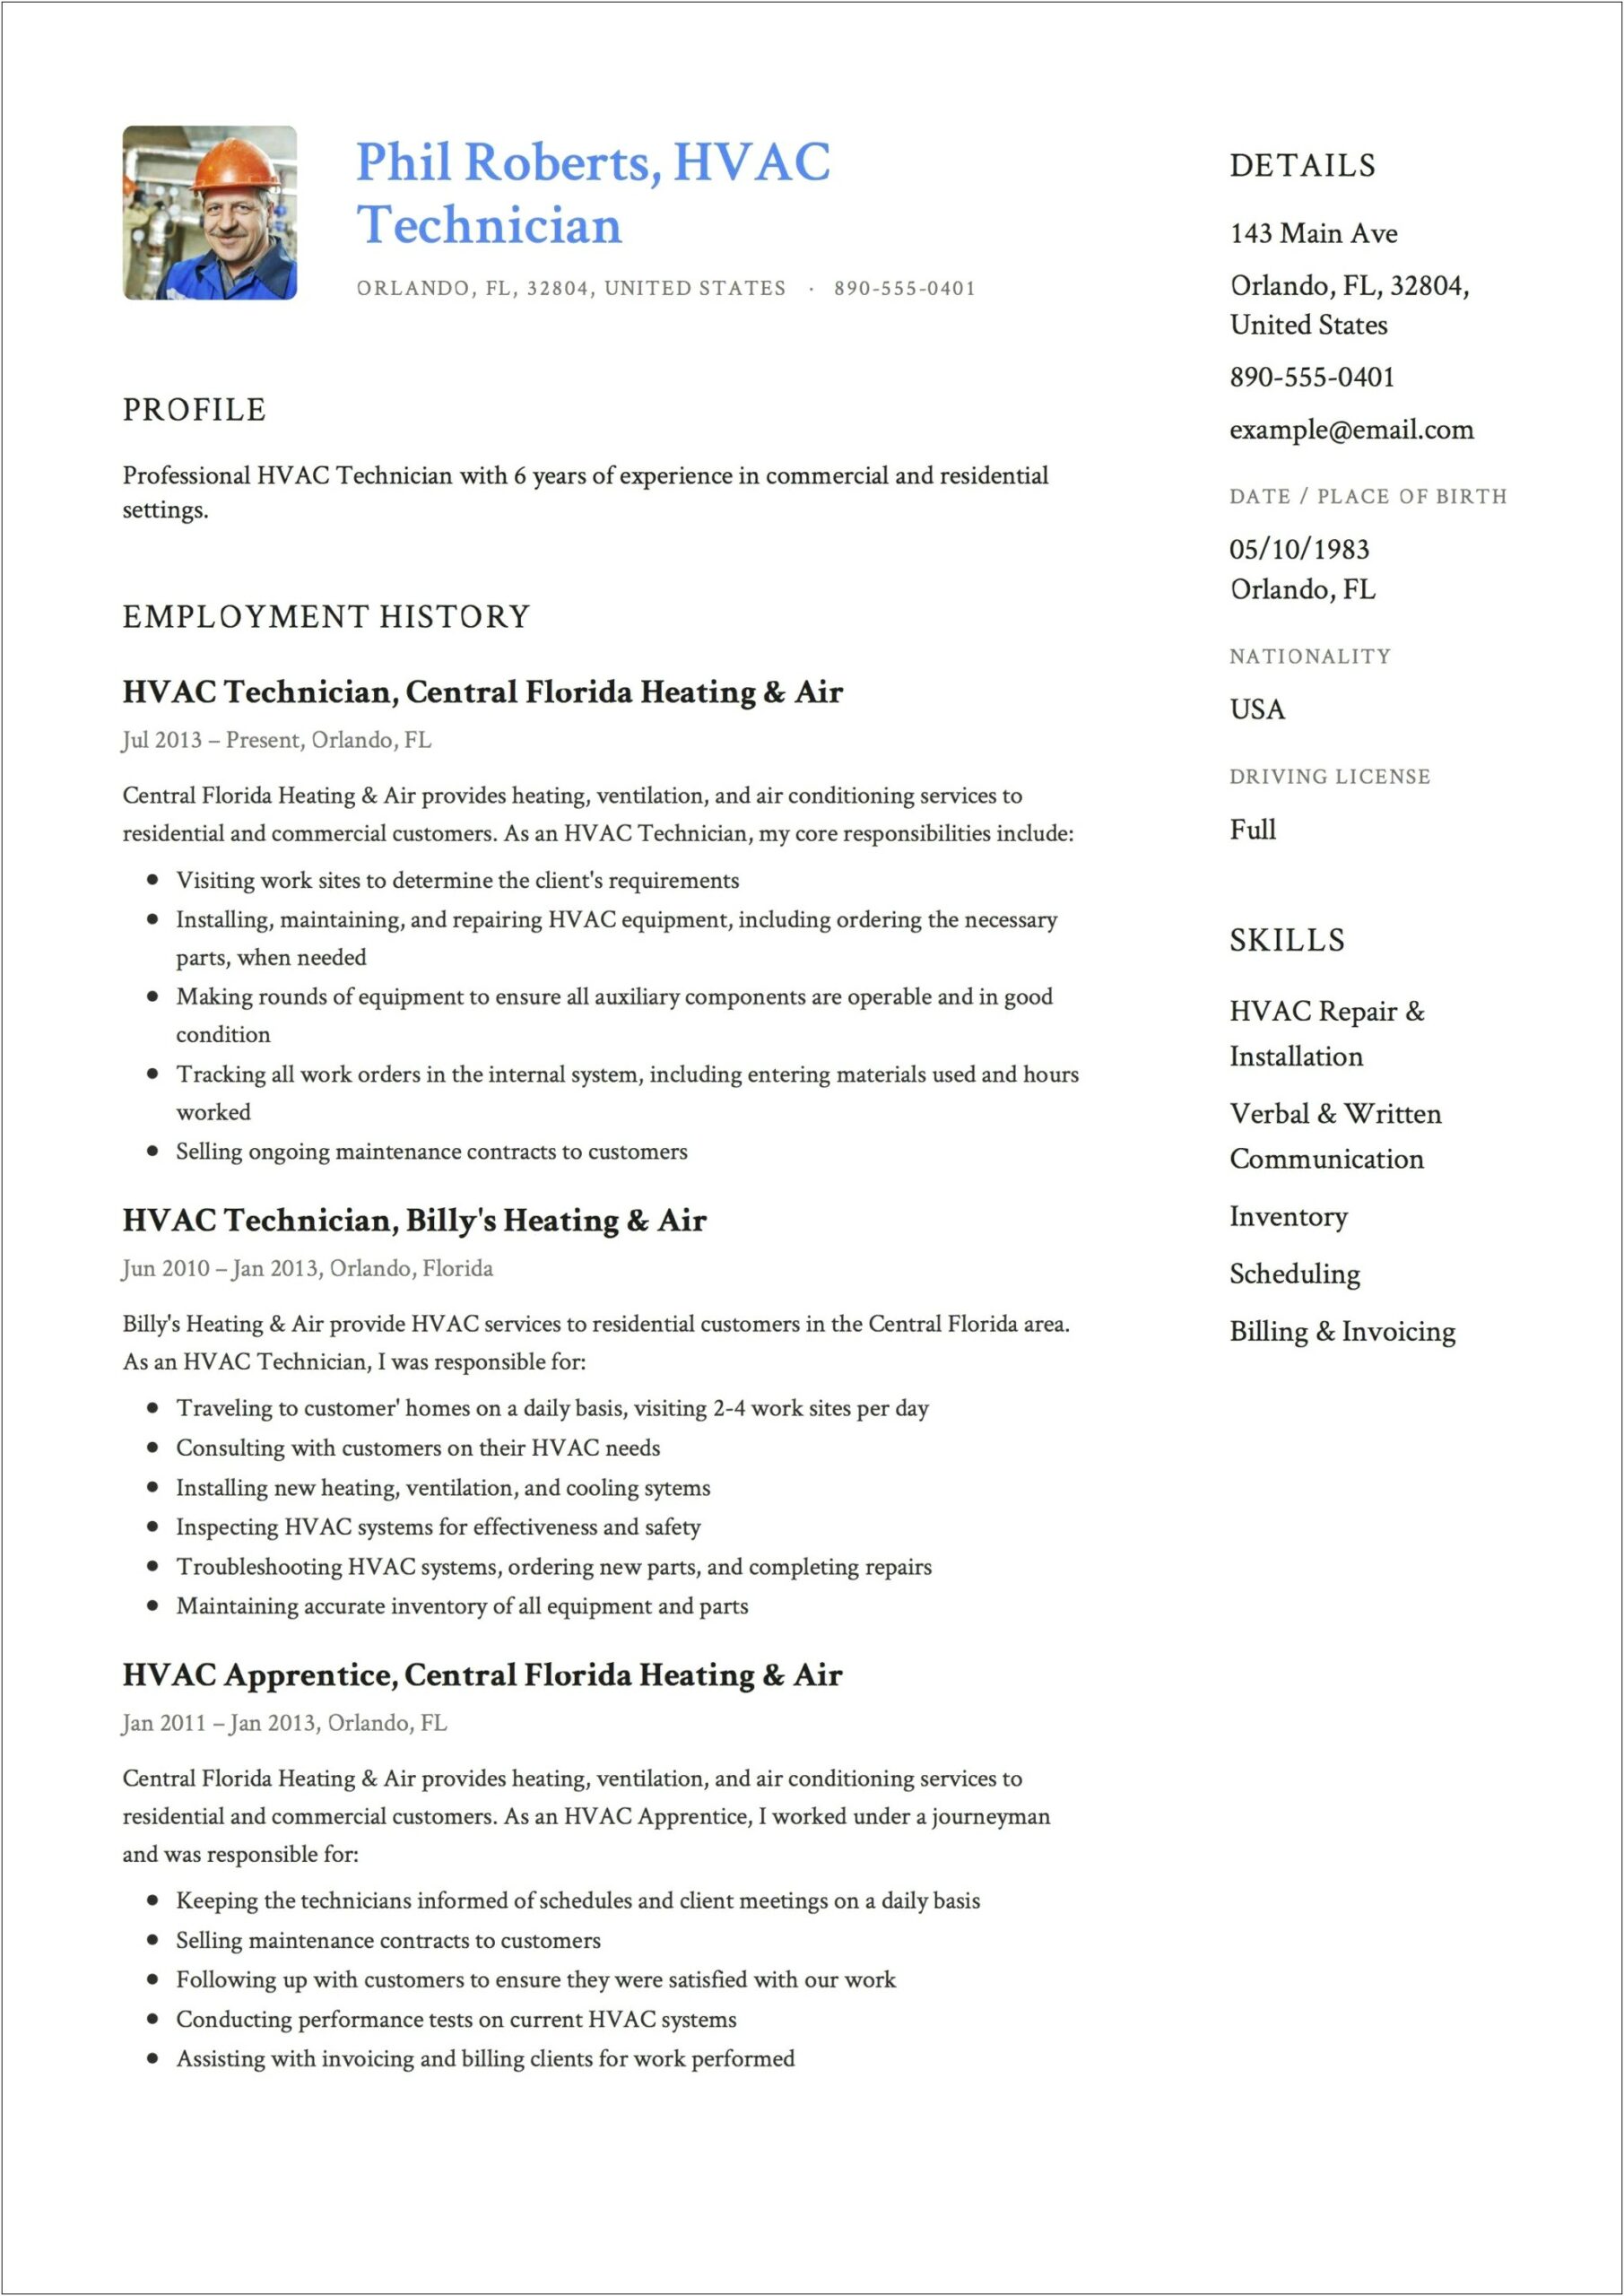 Resume Formating Lost Me A Job